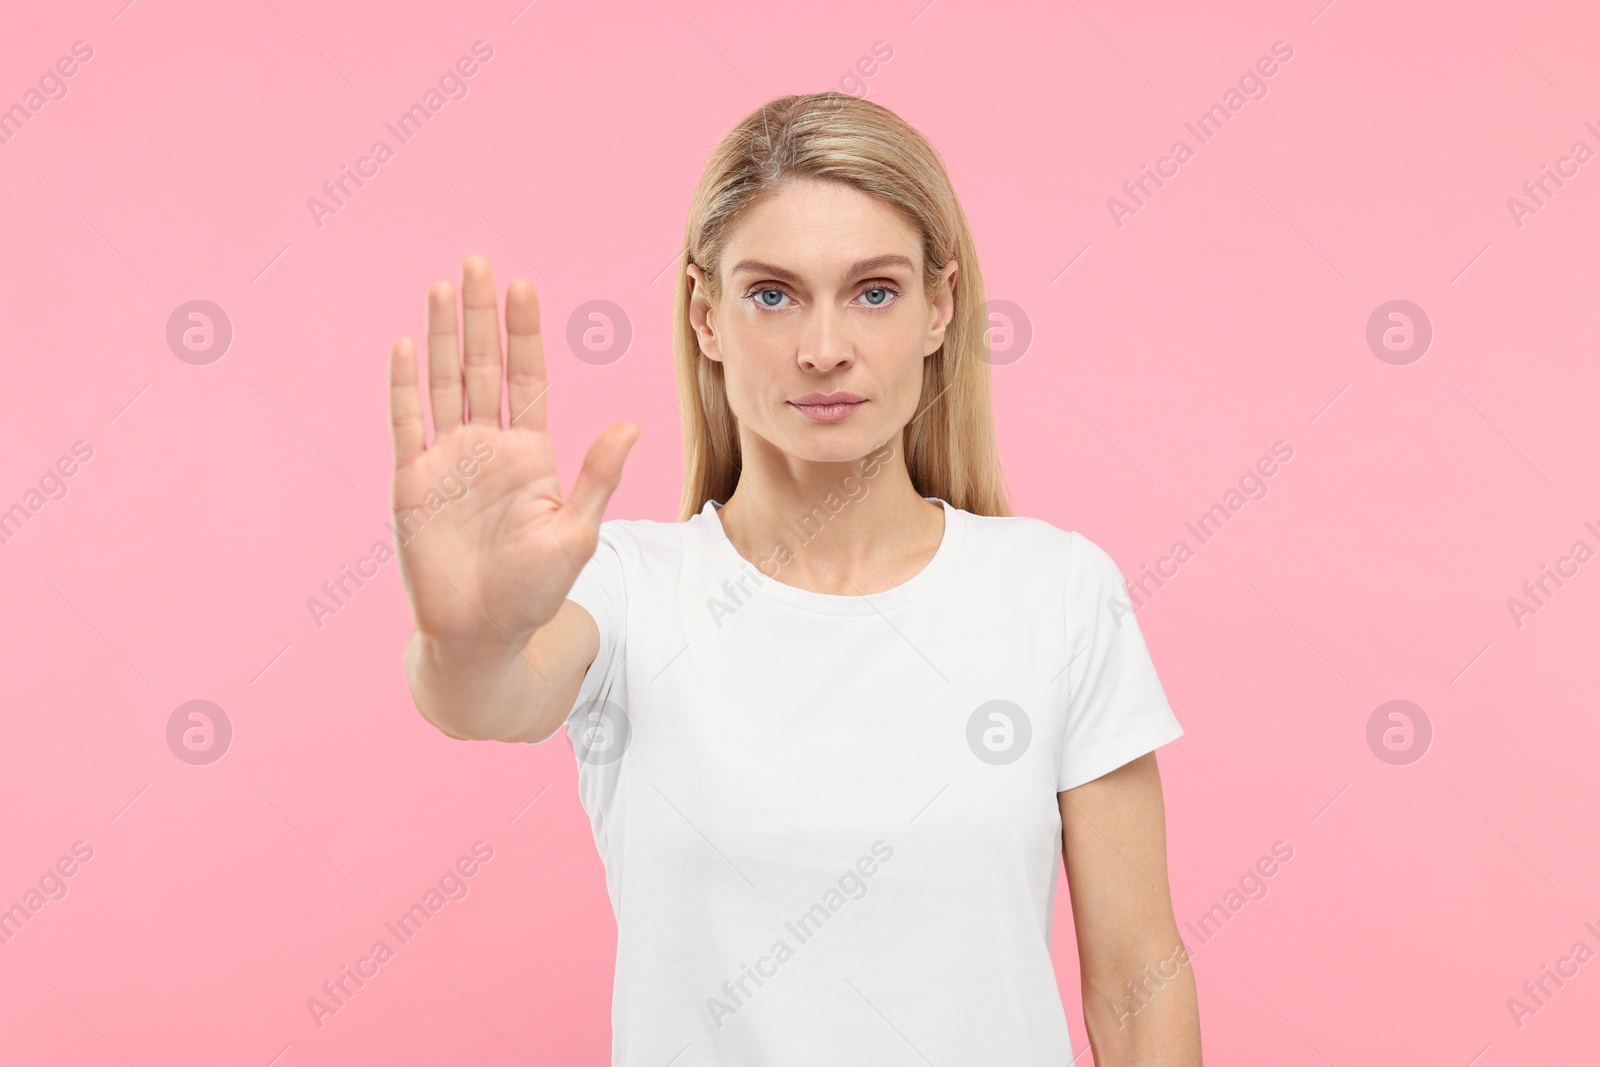 Photo of Woman showing stop gesture on pink background